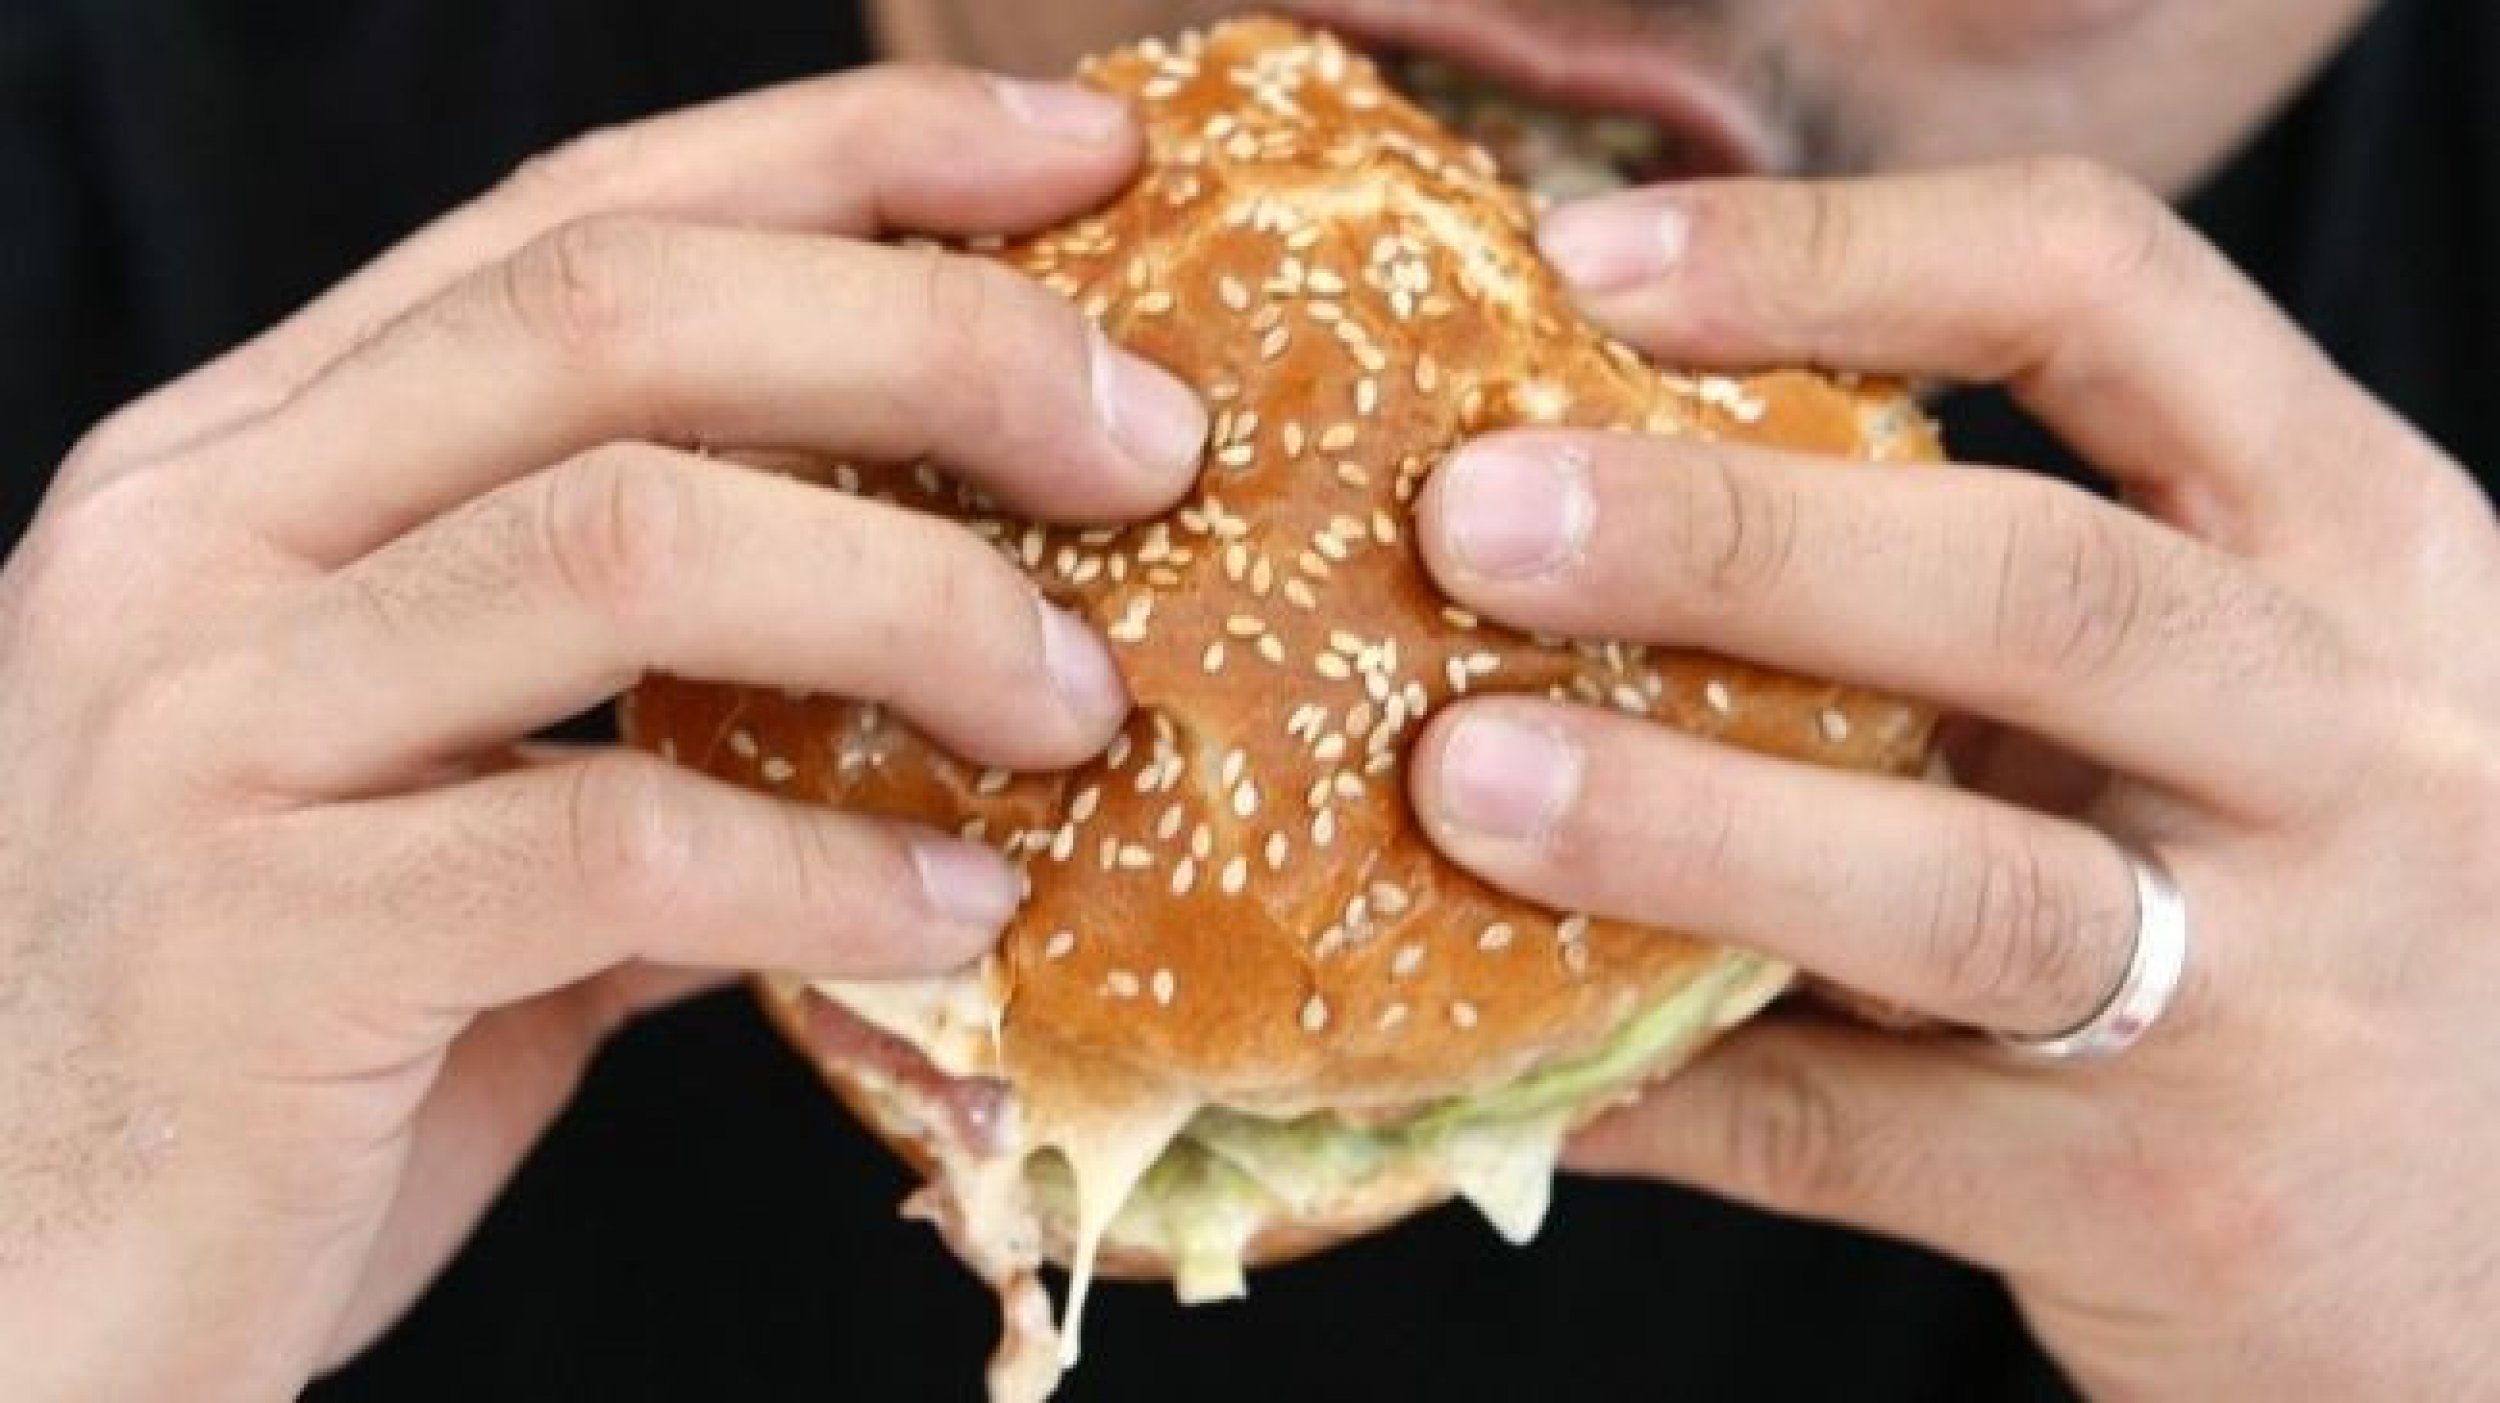 330,000 Burger Made Of Test Tube Meat, Expected In October